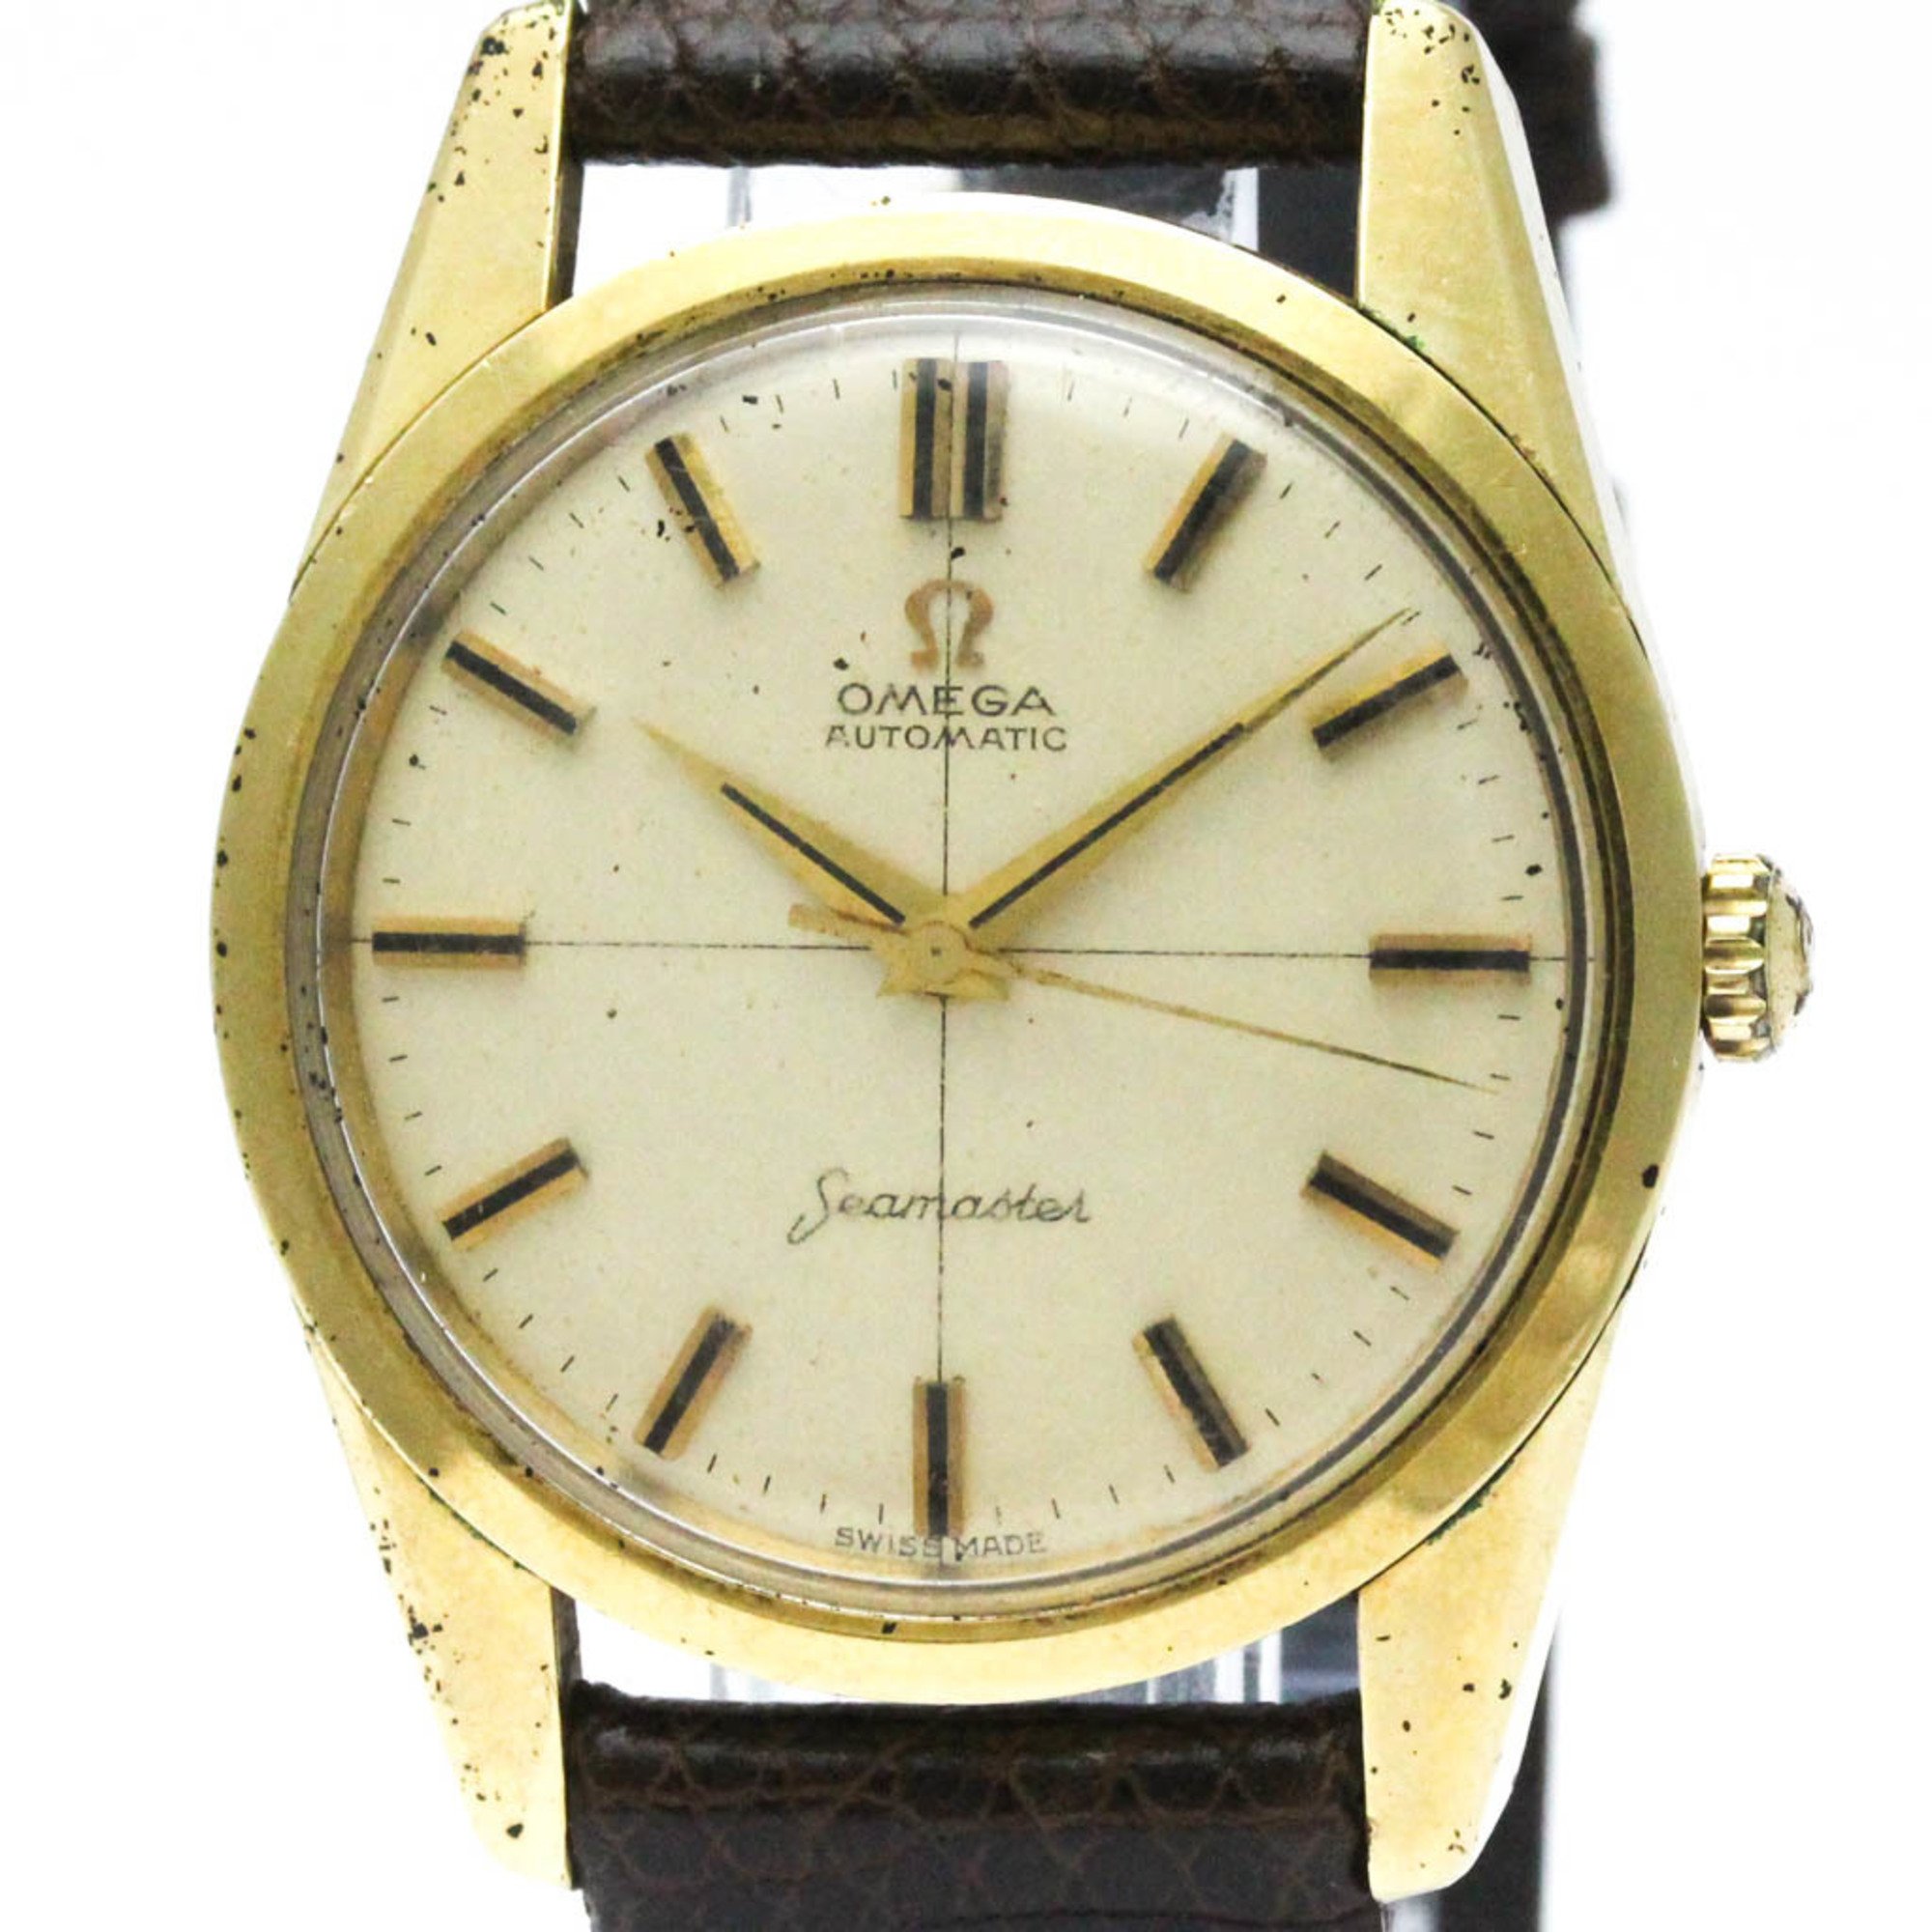 Vintage OMEGA Seamaster Cal.552 Gold Plated Automatic Mens Watch 14700 BF568296